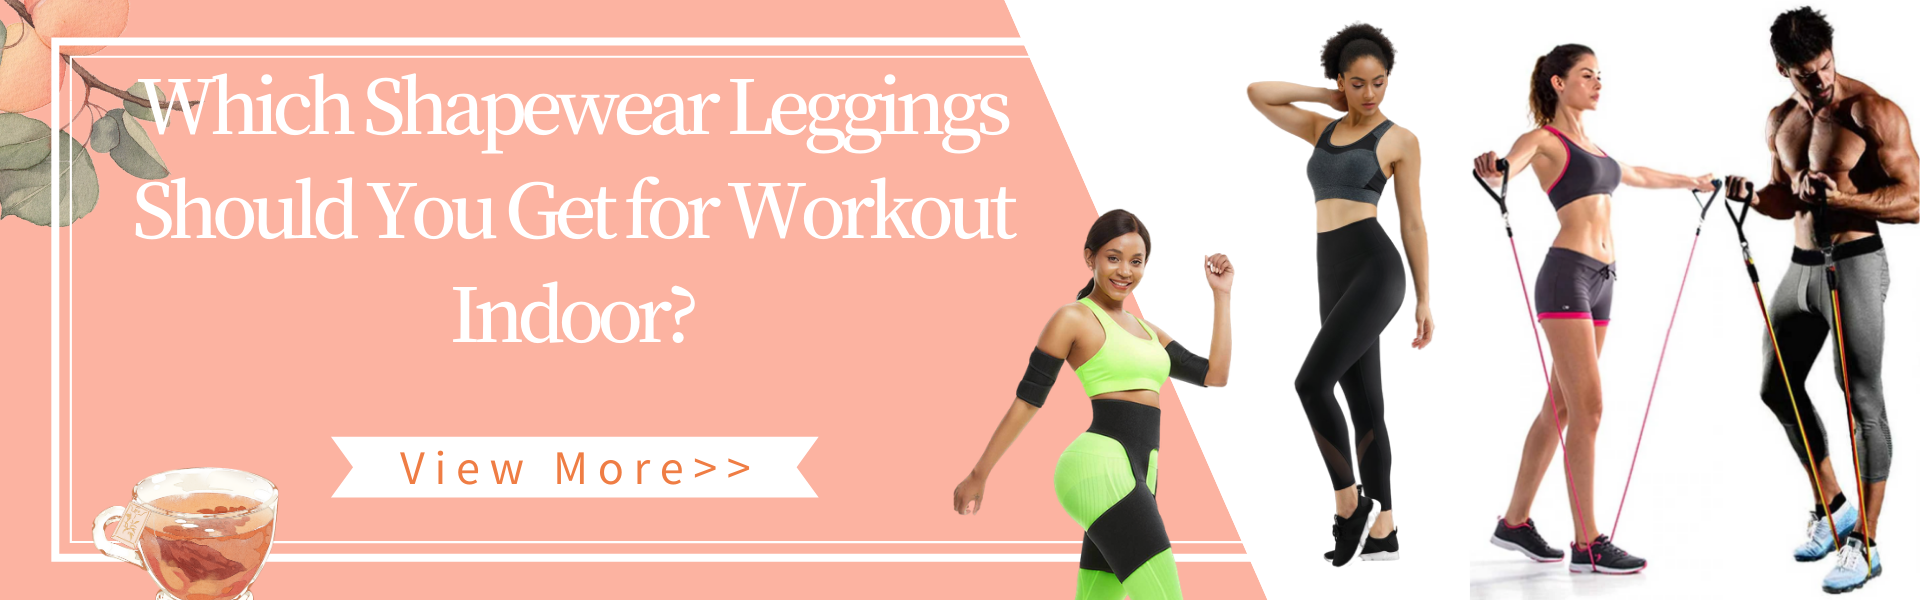 Which Shapewear Leggings Should You Get for Workout Indoor?